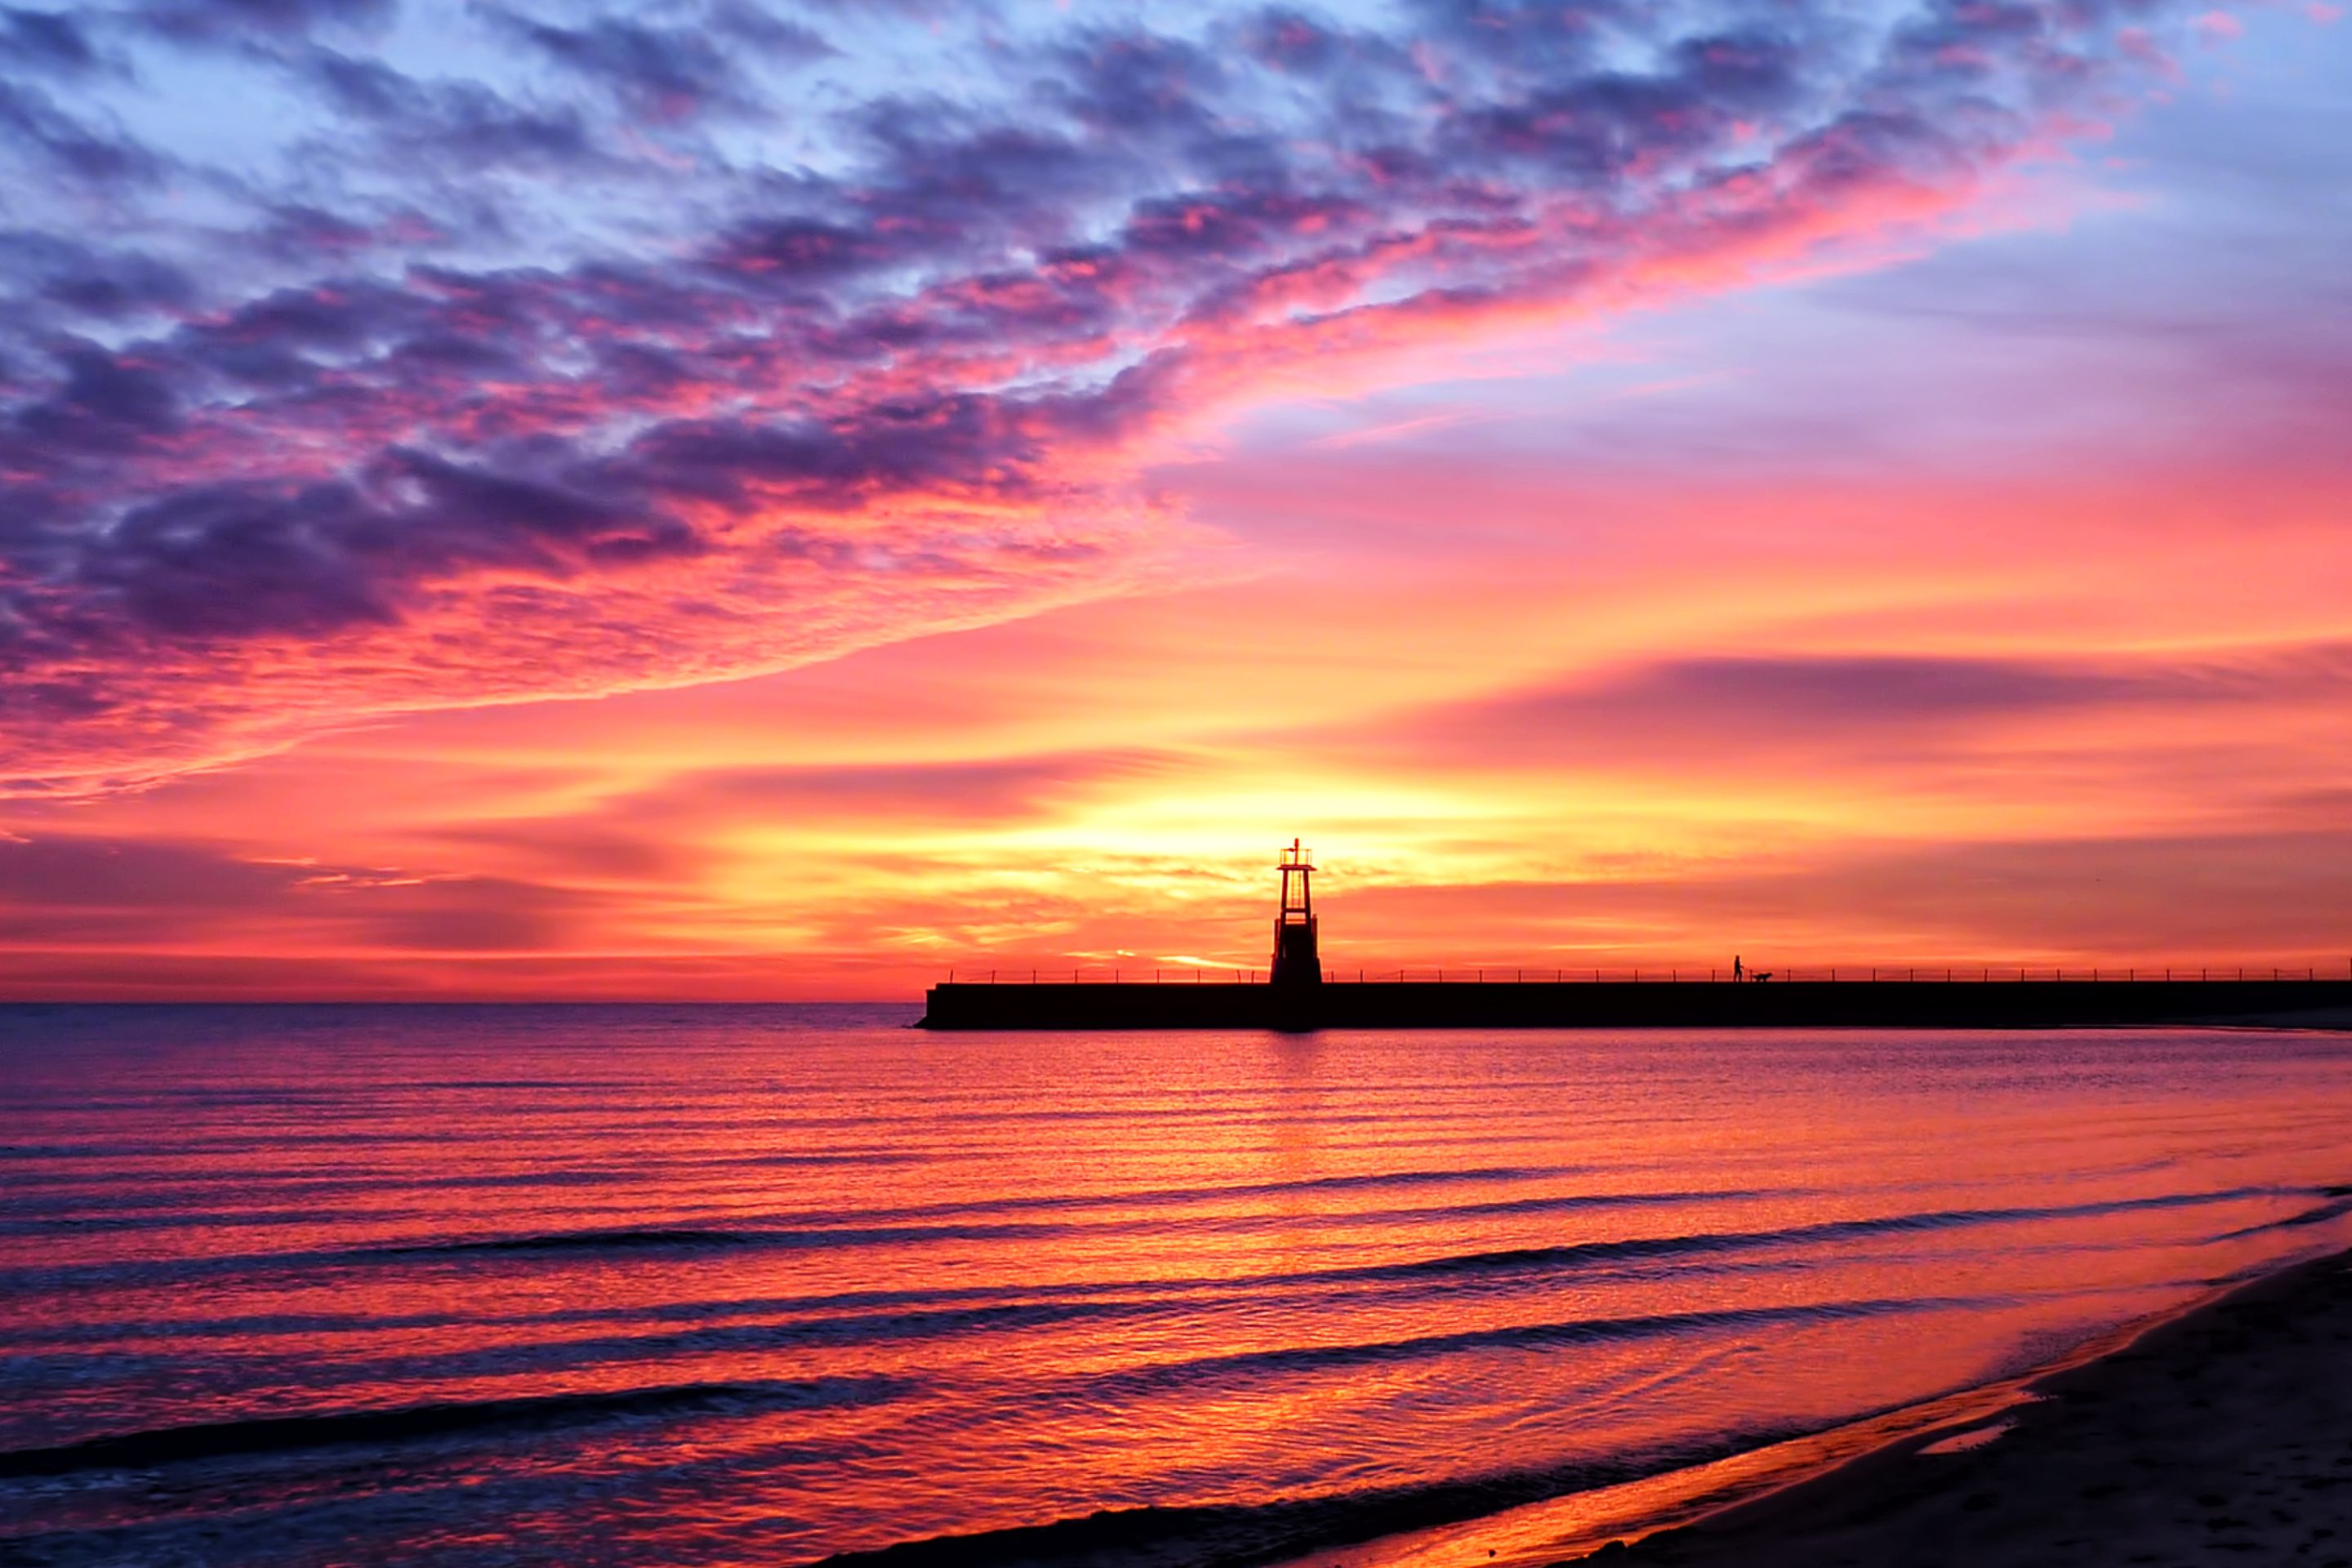 Lighthouse And Red Sunset Beach wallpaper 2880x1920